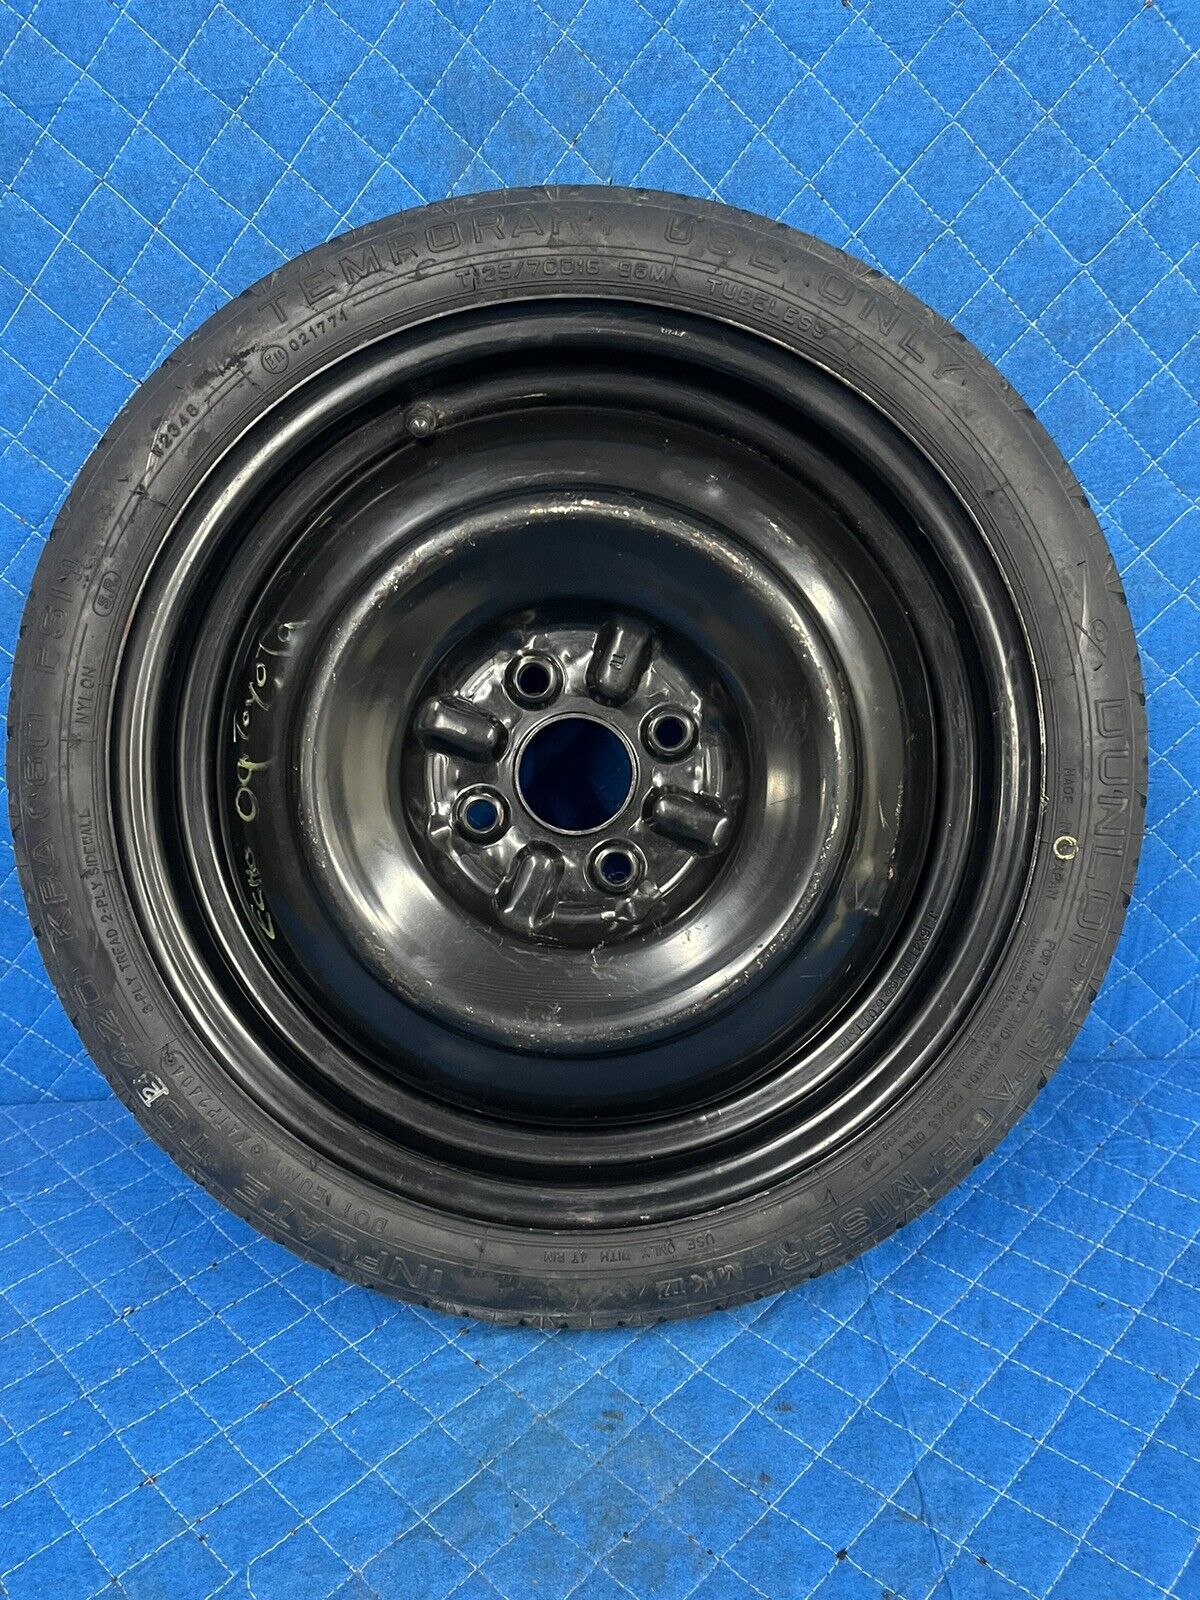 08 Toyota 16x4 Compact Spare Tire and Wheel Fits Yaris Echo T125/70D16 OEM-4